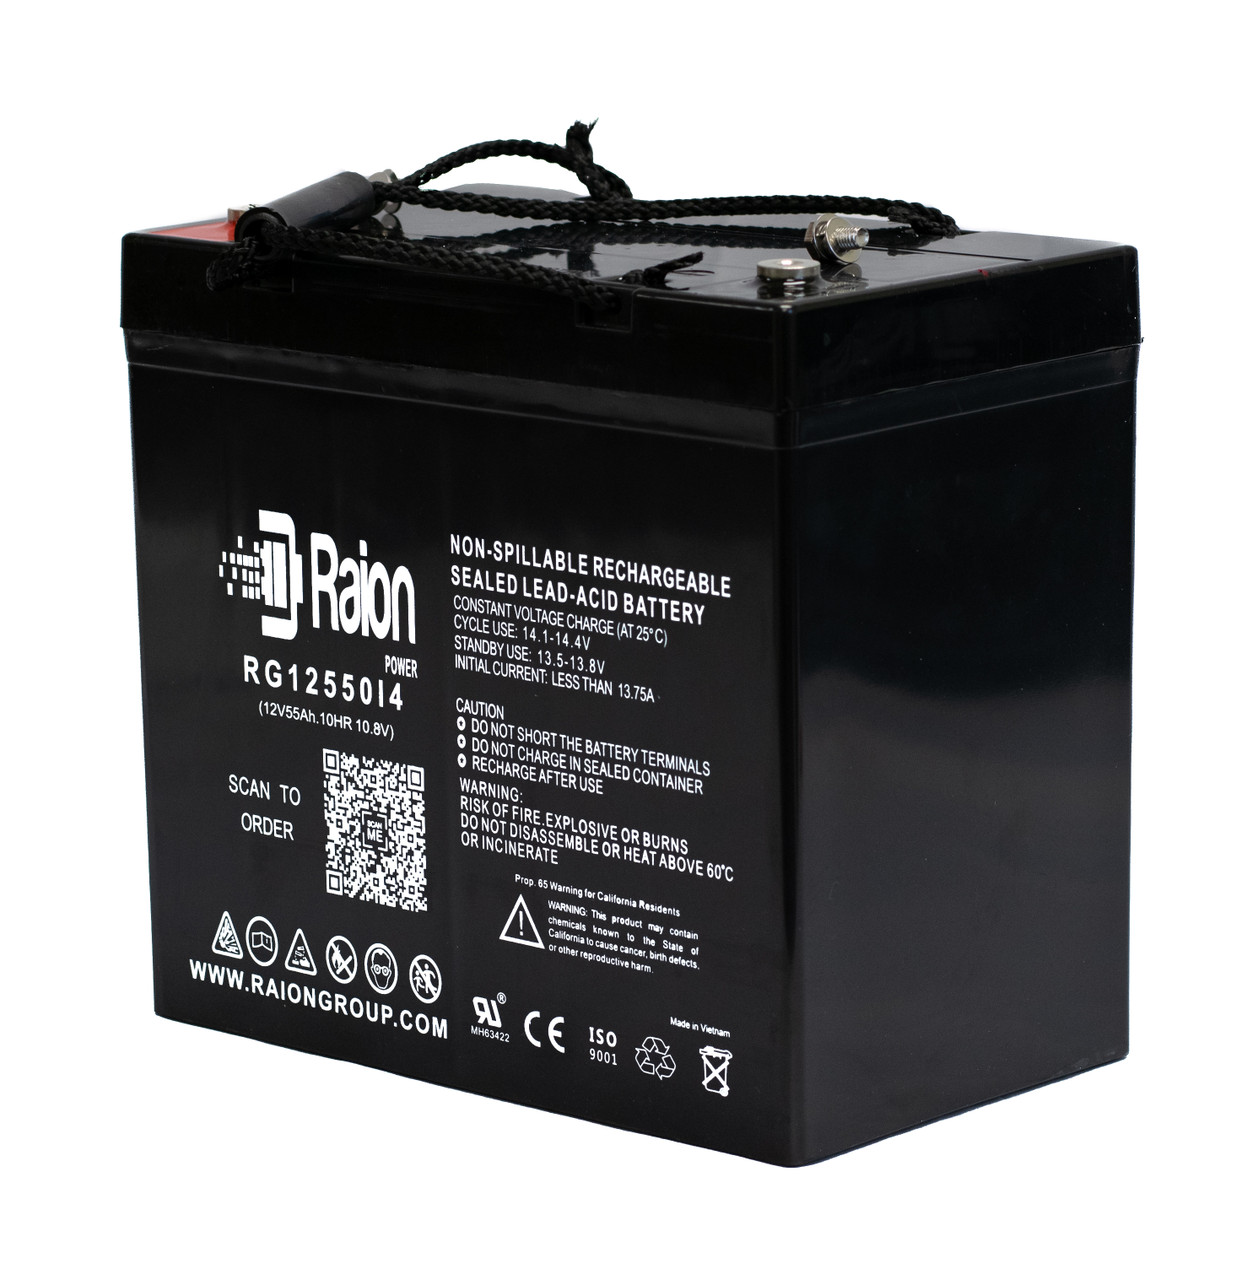 Raion Power 12V 55Ah 22NF Mobility Scooter Battery Replacement for Chauffeur Mobility C Series